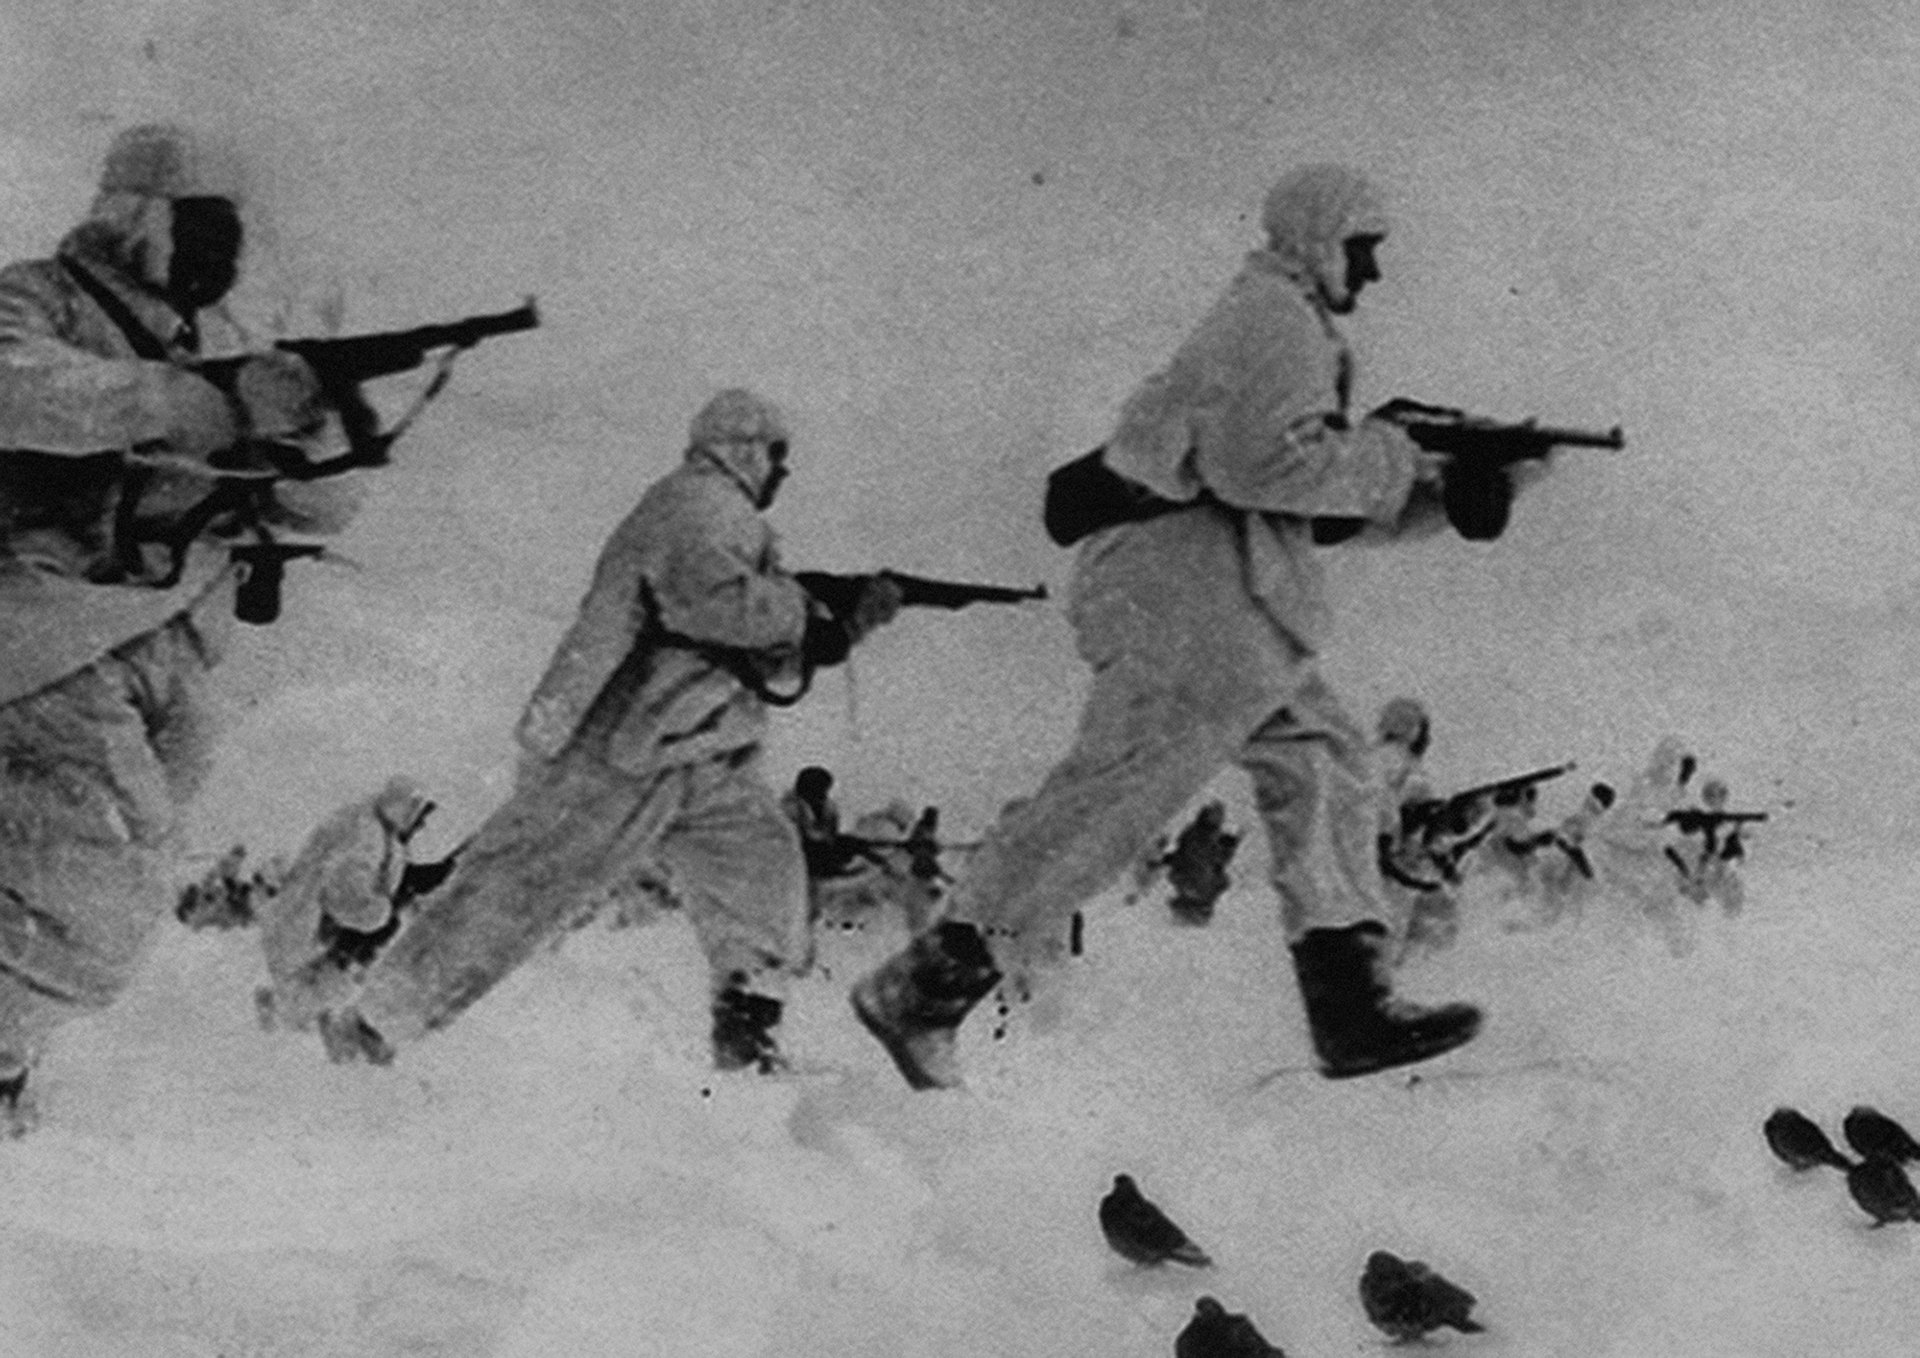 Spy pigeons on the battlefield during World War II, 1943. The memoirs of Yan Khtovich, 2015-2017